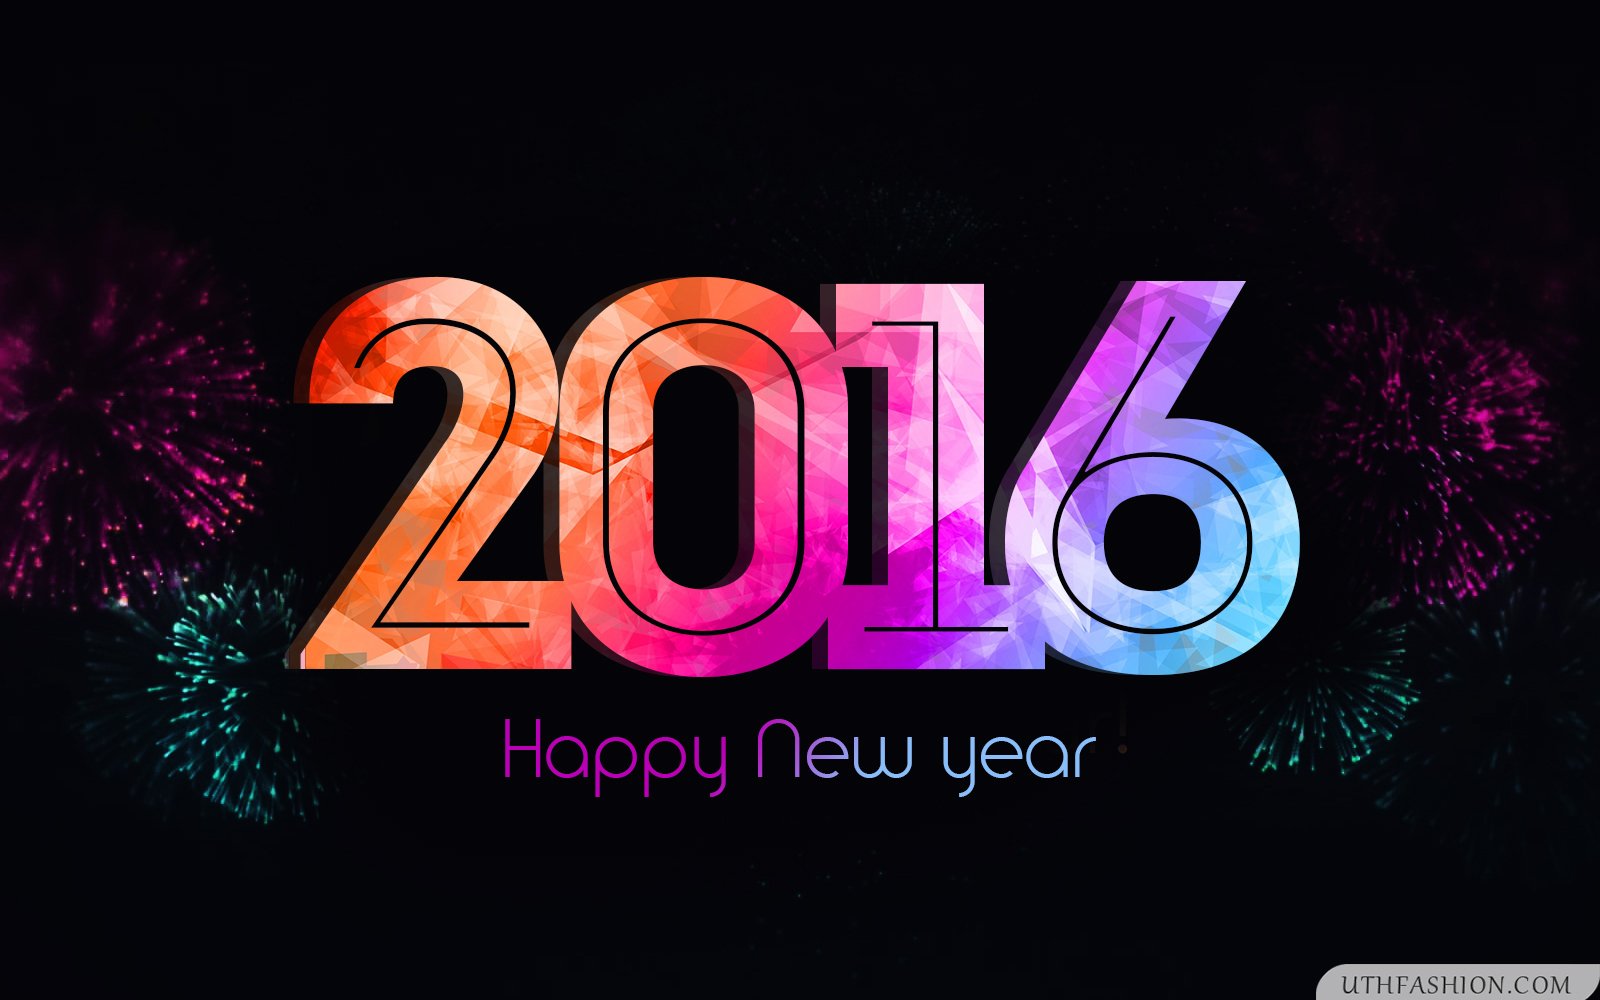 2016 Happy New Year Wishes HD Wallpaper